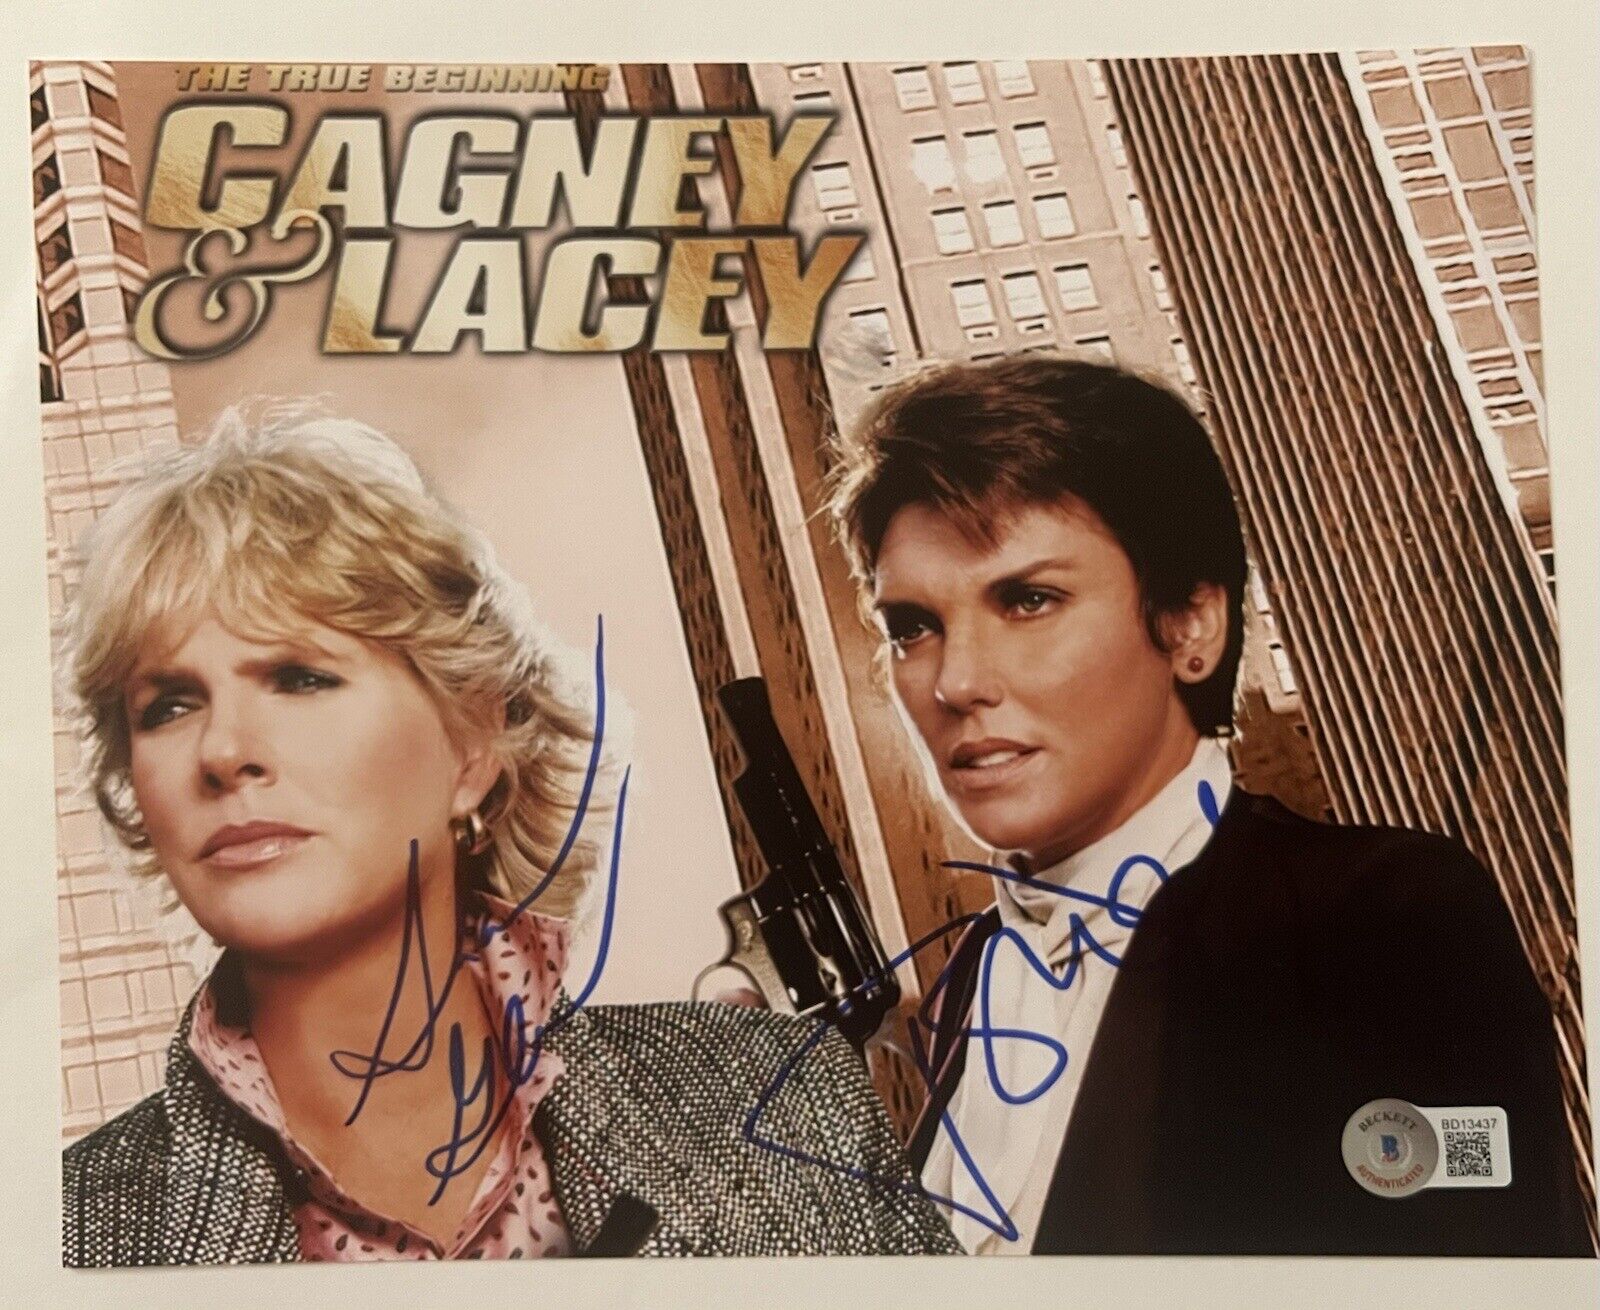 Cagney & Lacey Sharon Gless & Tyne Daly signed Autographed 8x10 Photo Poster painting Becket